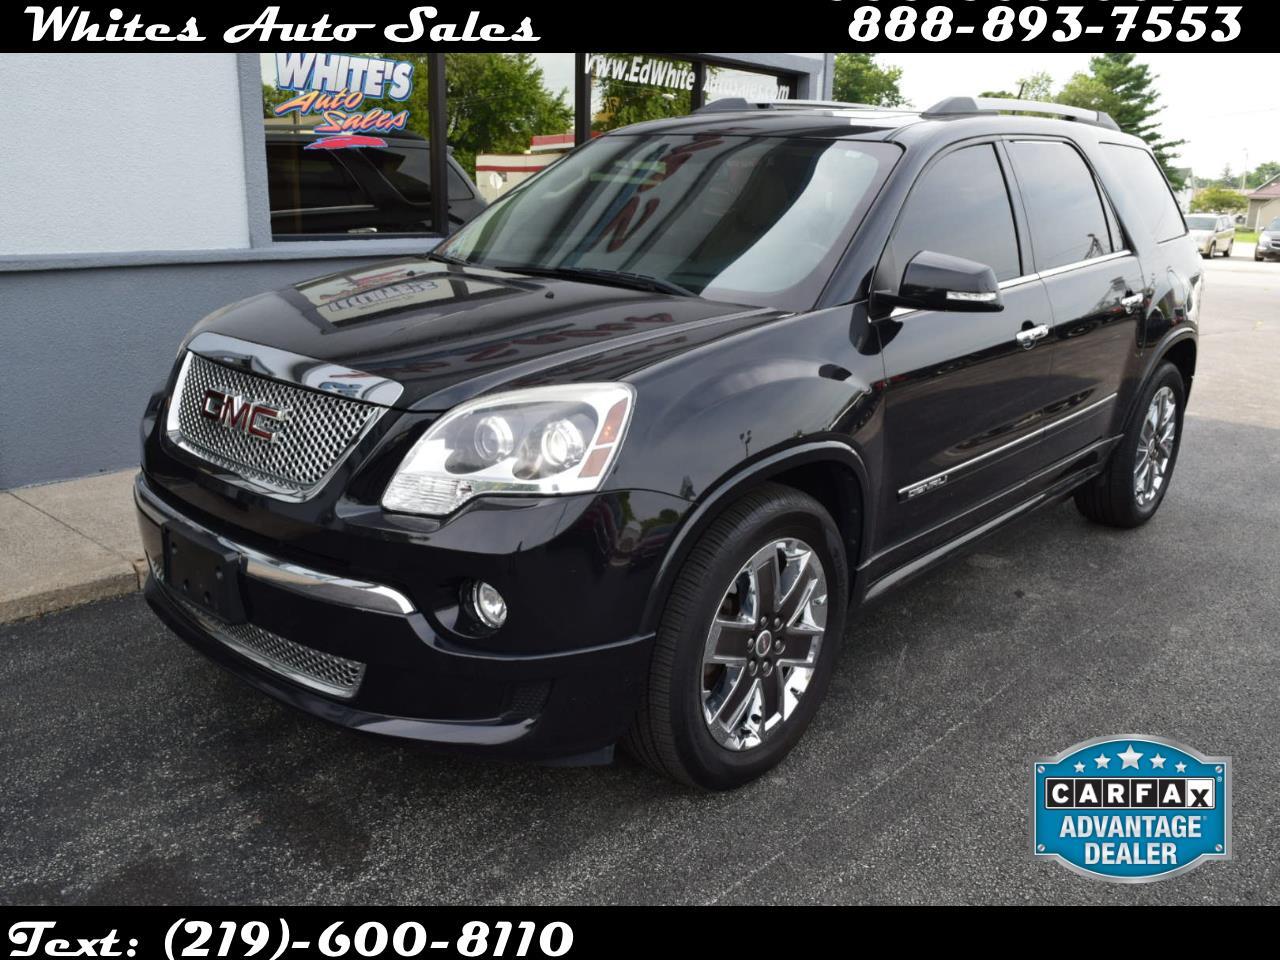 Used 2012 Gmc Acadia Awd 4dr Denali For Sale In Rensselaer In